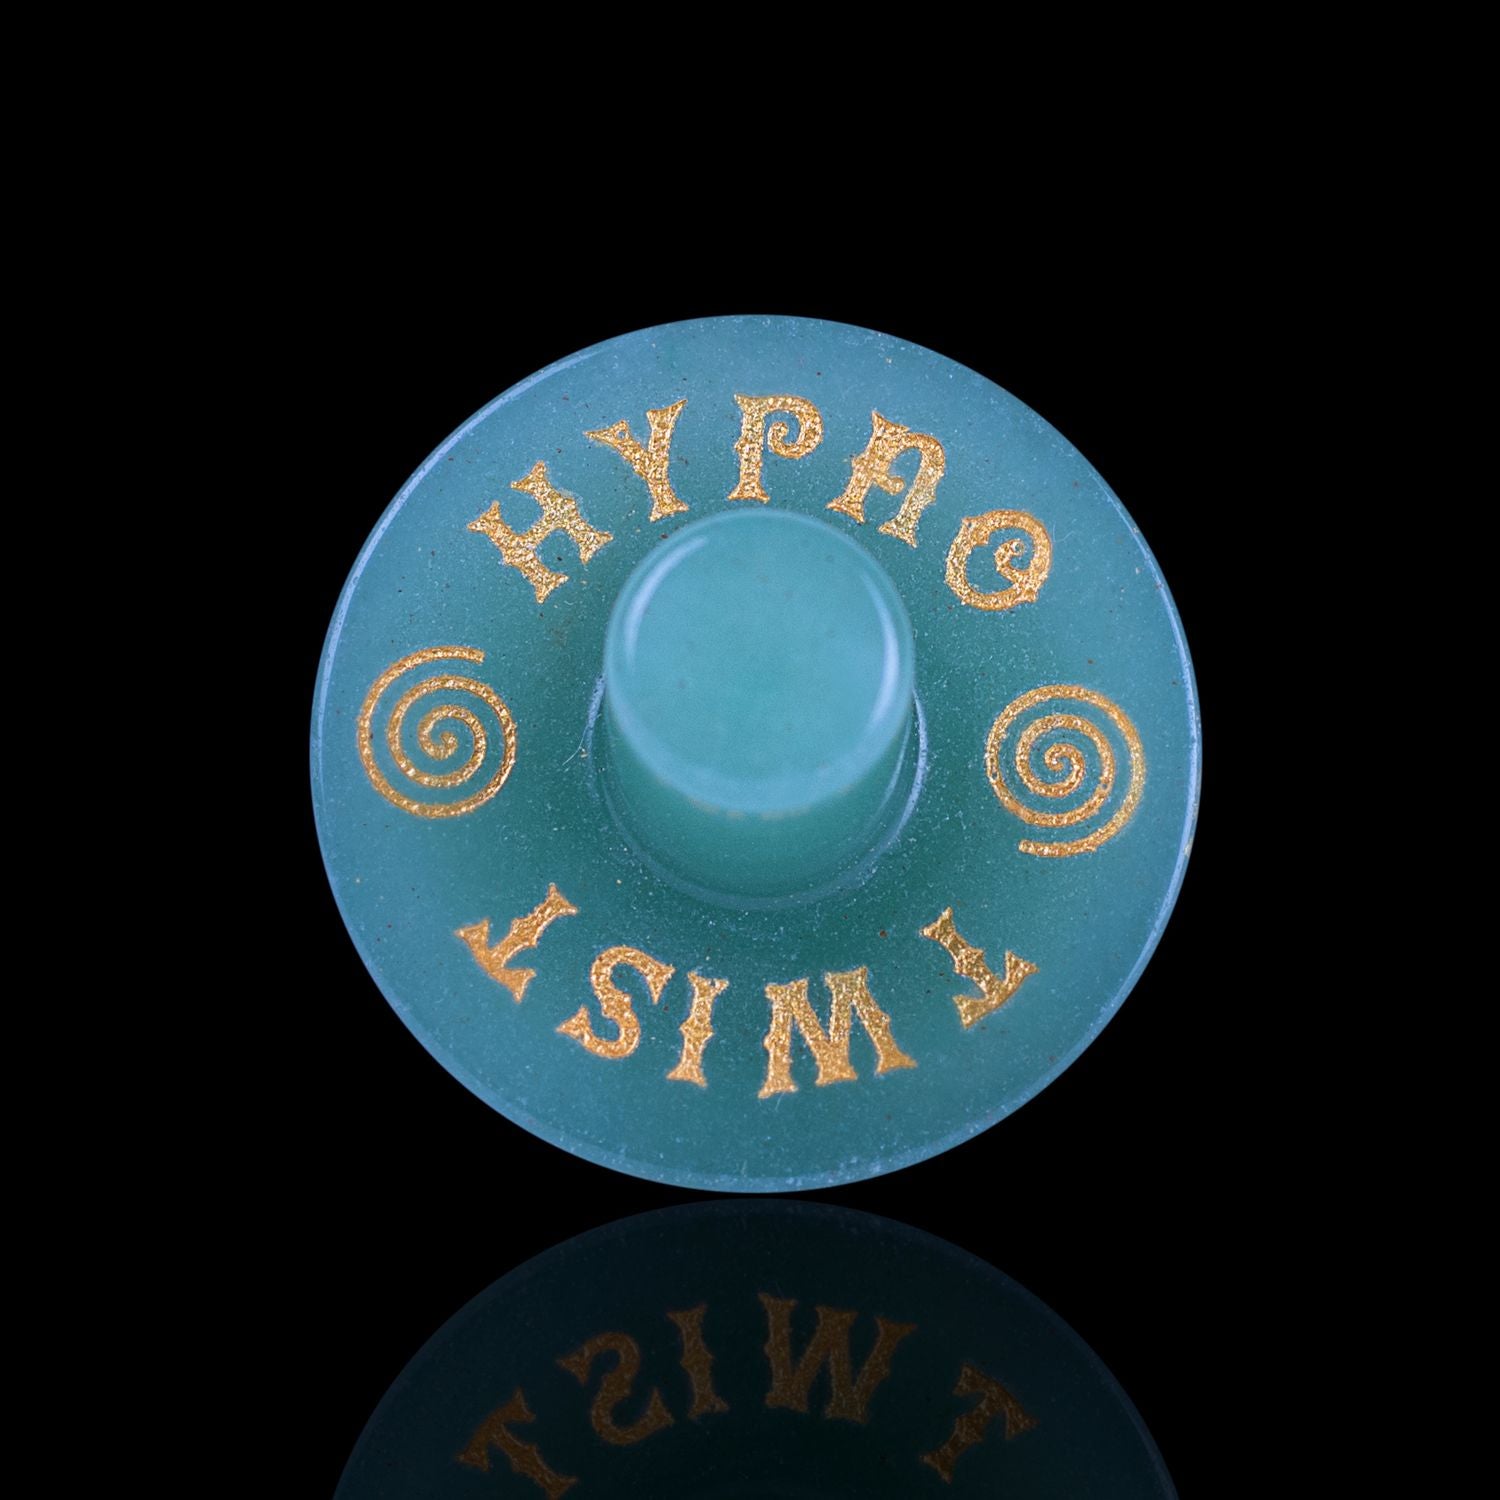 Front View Of The Naturally Wicked Exclusive Hypnotwister. A Green Aventurine Crystal Spinning Top Engraved With Hypno Twist